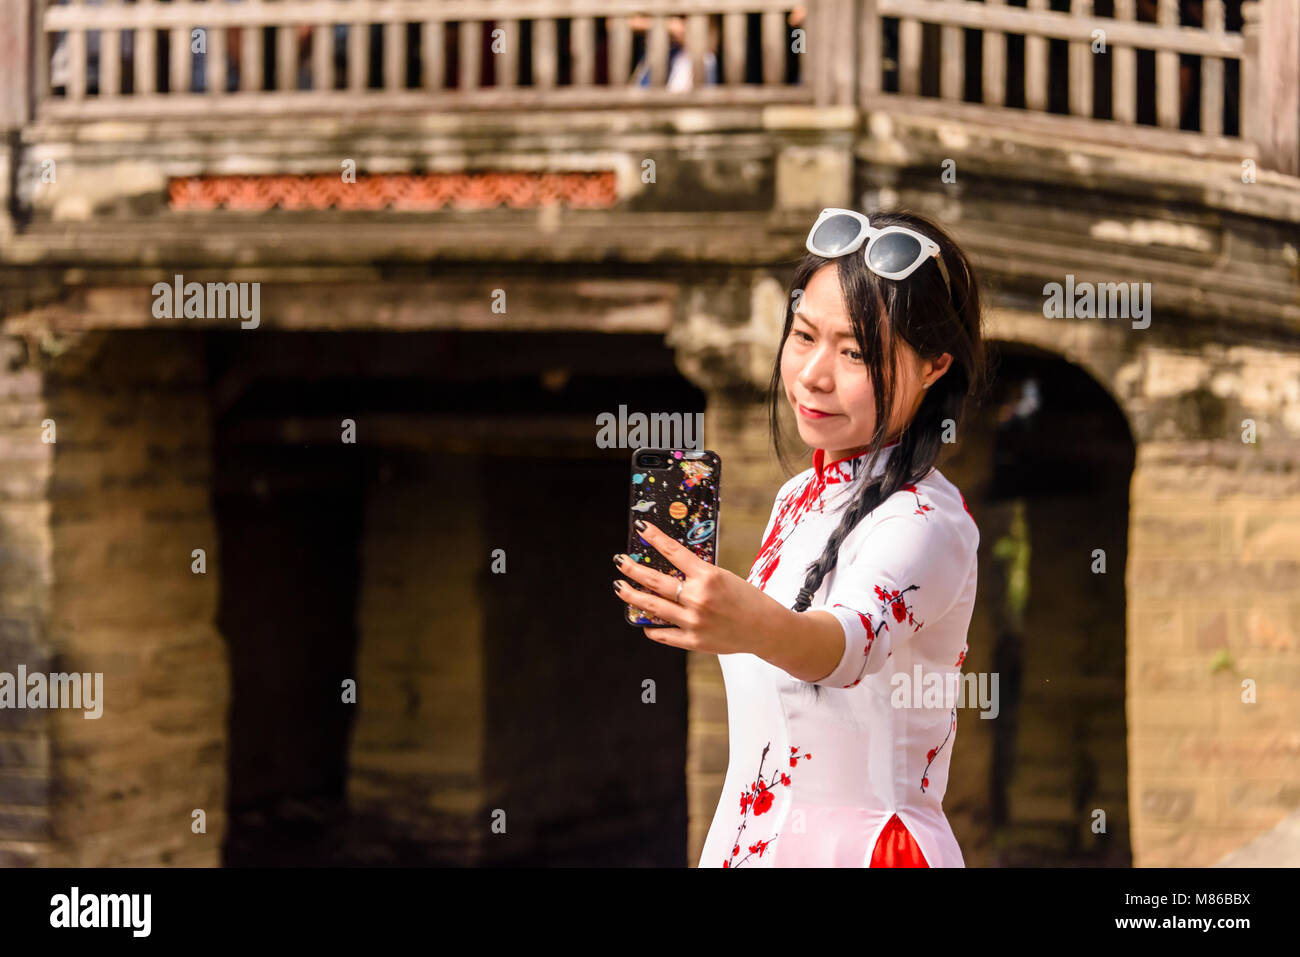 A woman takes a selfie at the Chùa Cầu Japanese bridge, an 18th century carved wooden bridge which incorporates a shrine, in Hoi An, Vietnam Stock Photo